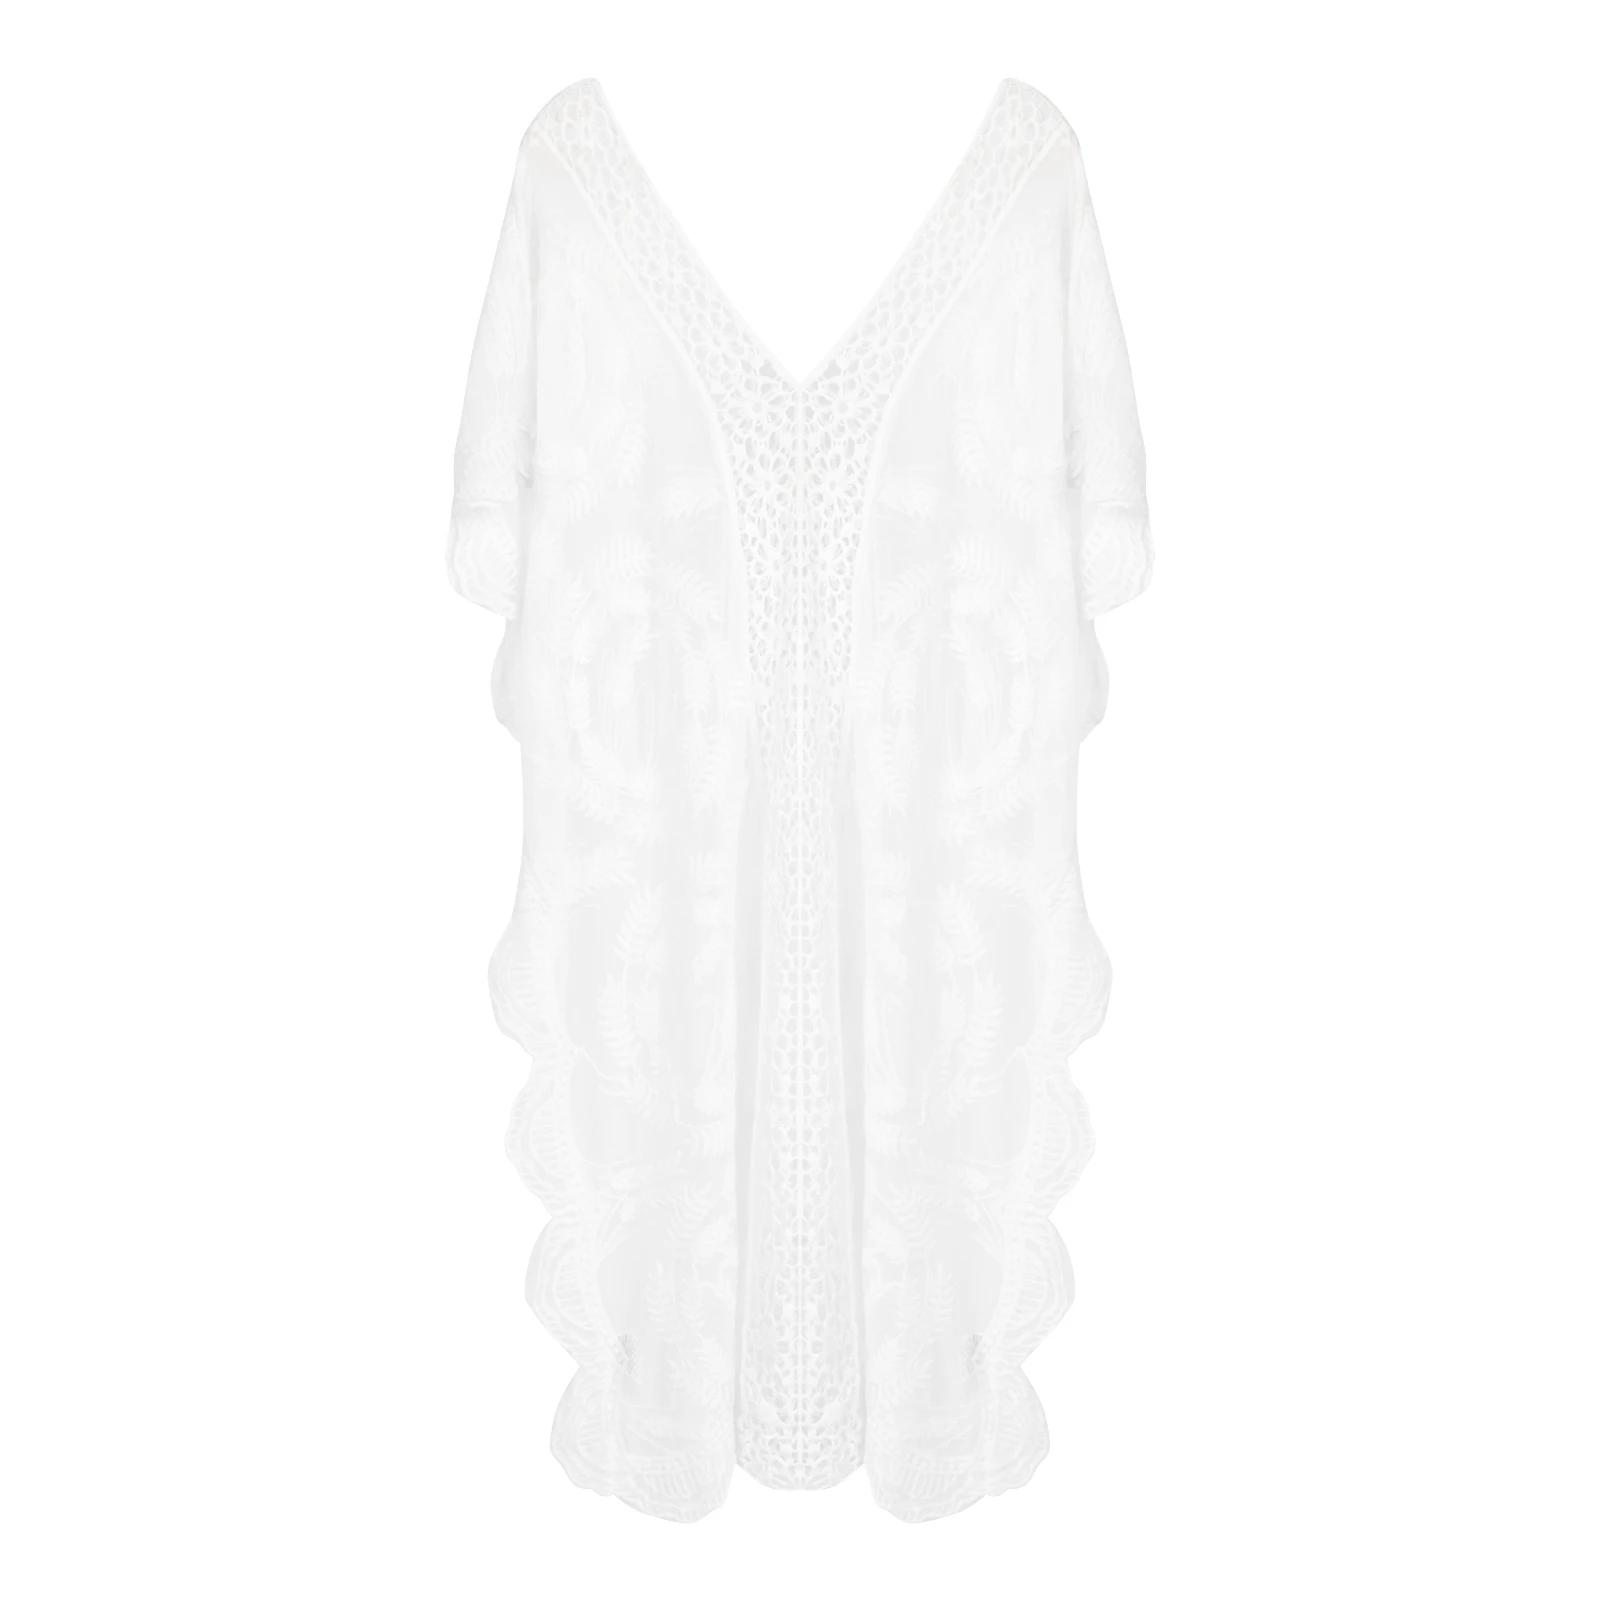 bathing suit and cover up set Beach Dress Women's Hollow Out Cover-Ups Sexy Short Sleeve Sheer Crochet Swimsuit Cover Up Dress Swimwears bikini cover up set